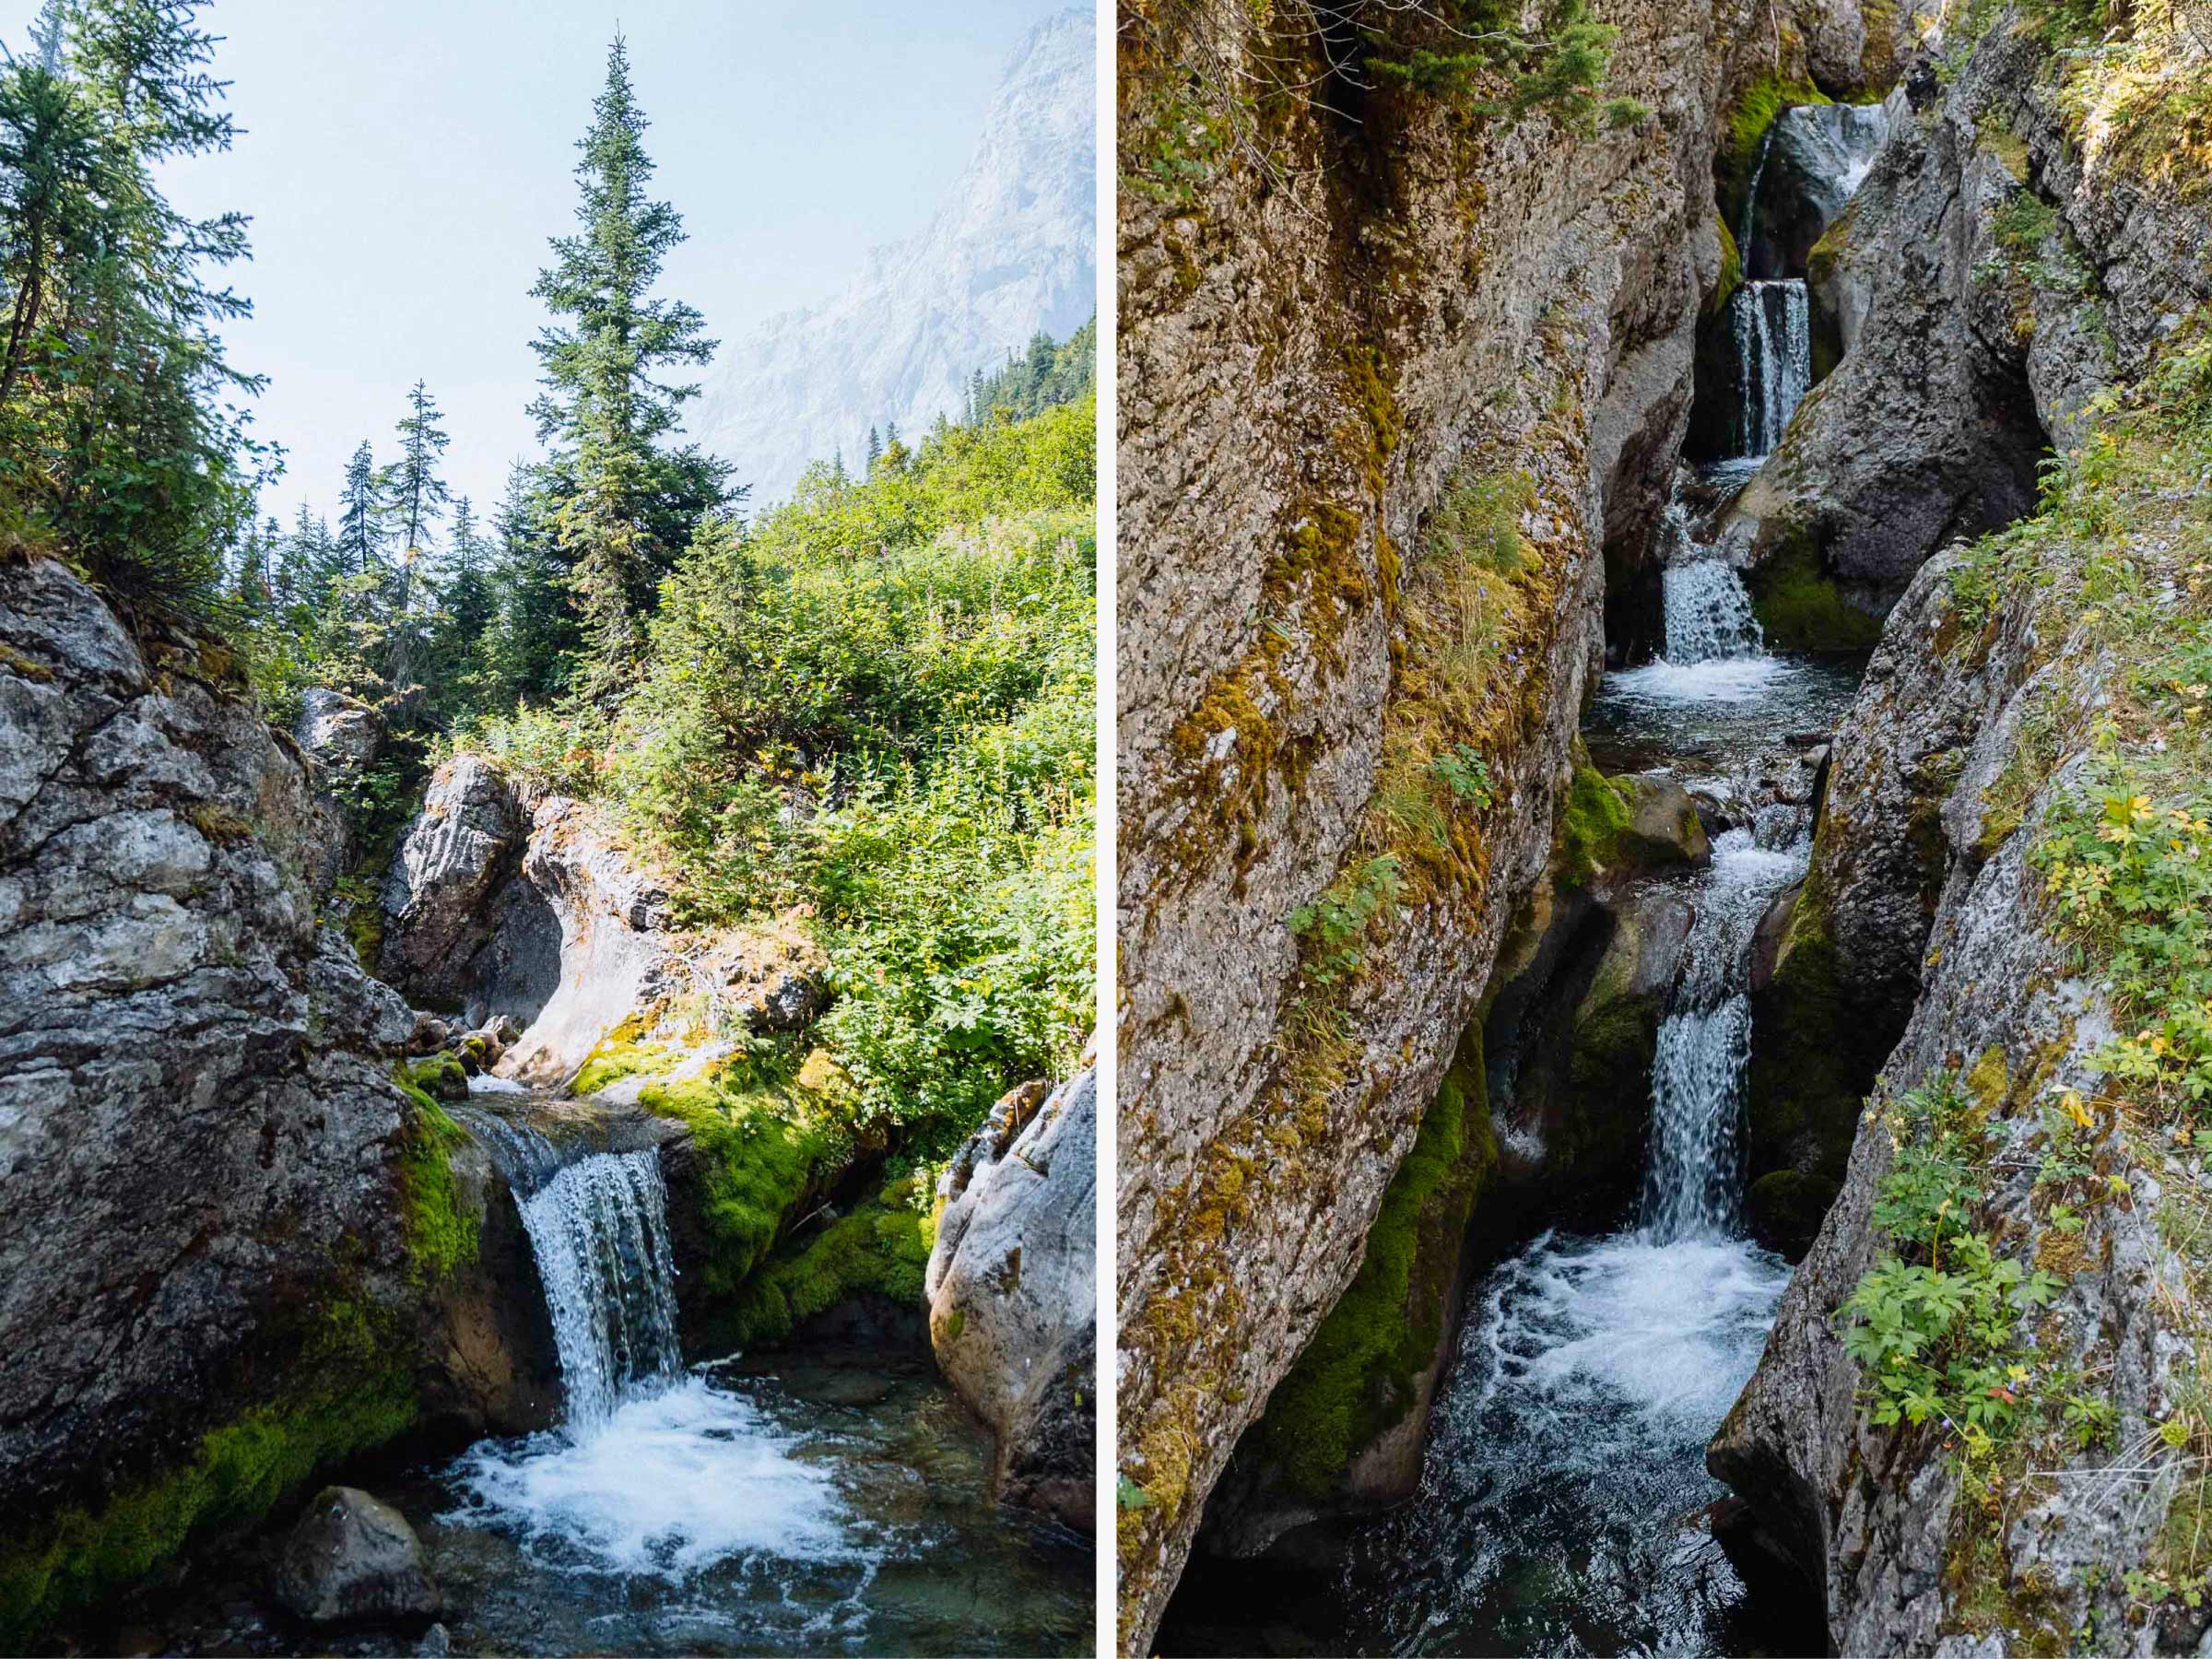 Cascades and waterfalls on Heiko's Trail